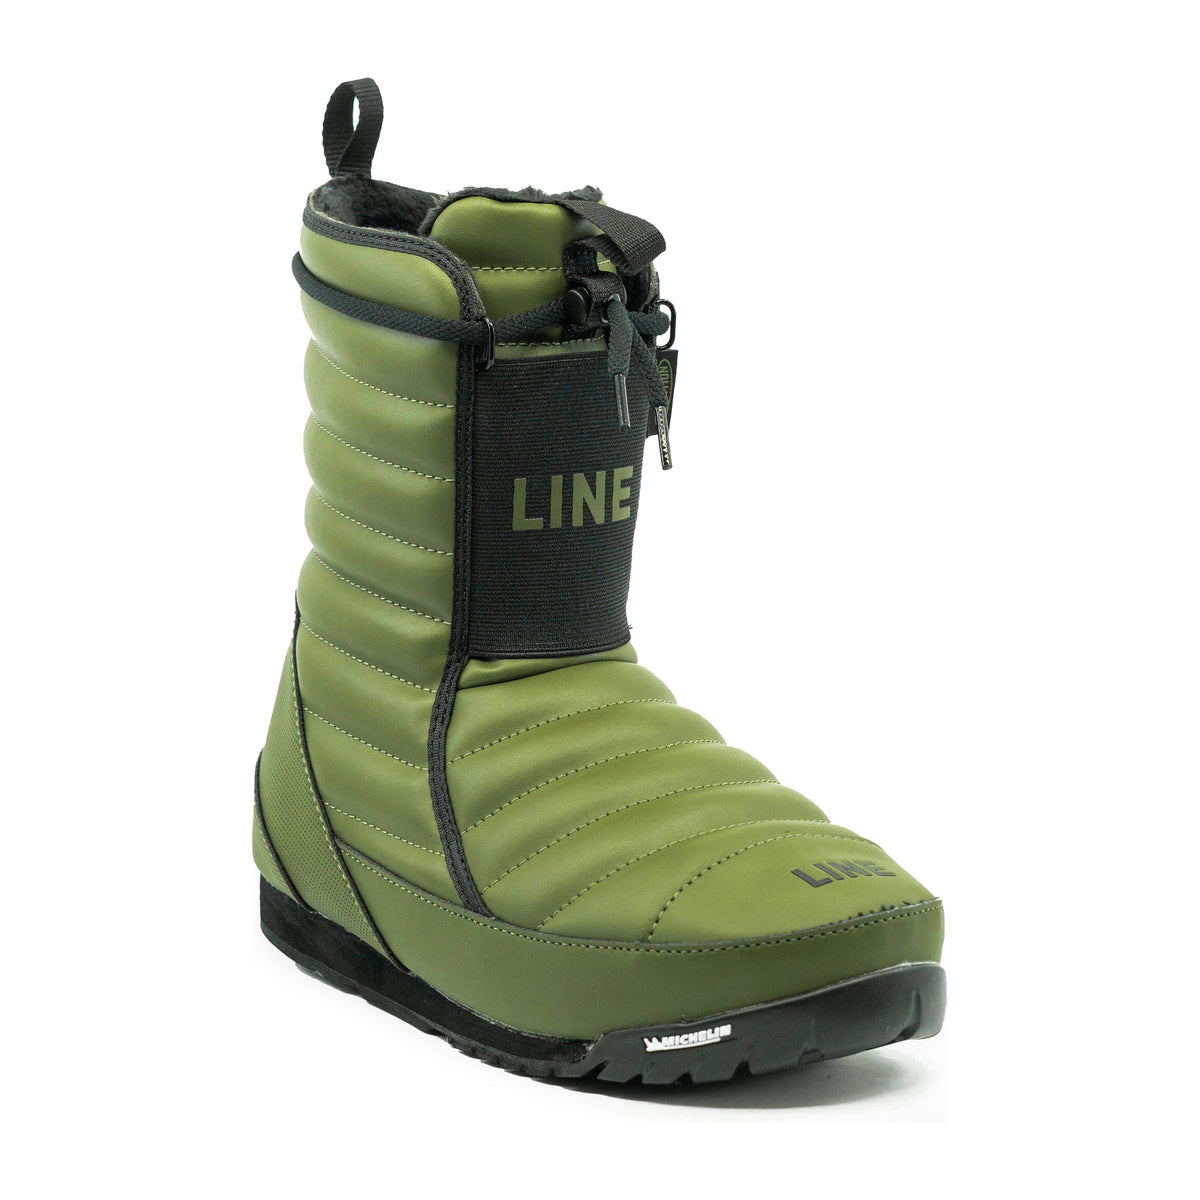 Line Bootie 2.0 (Closeout)